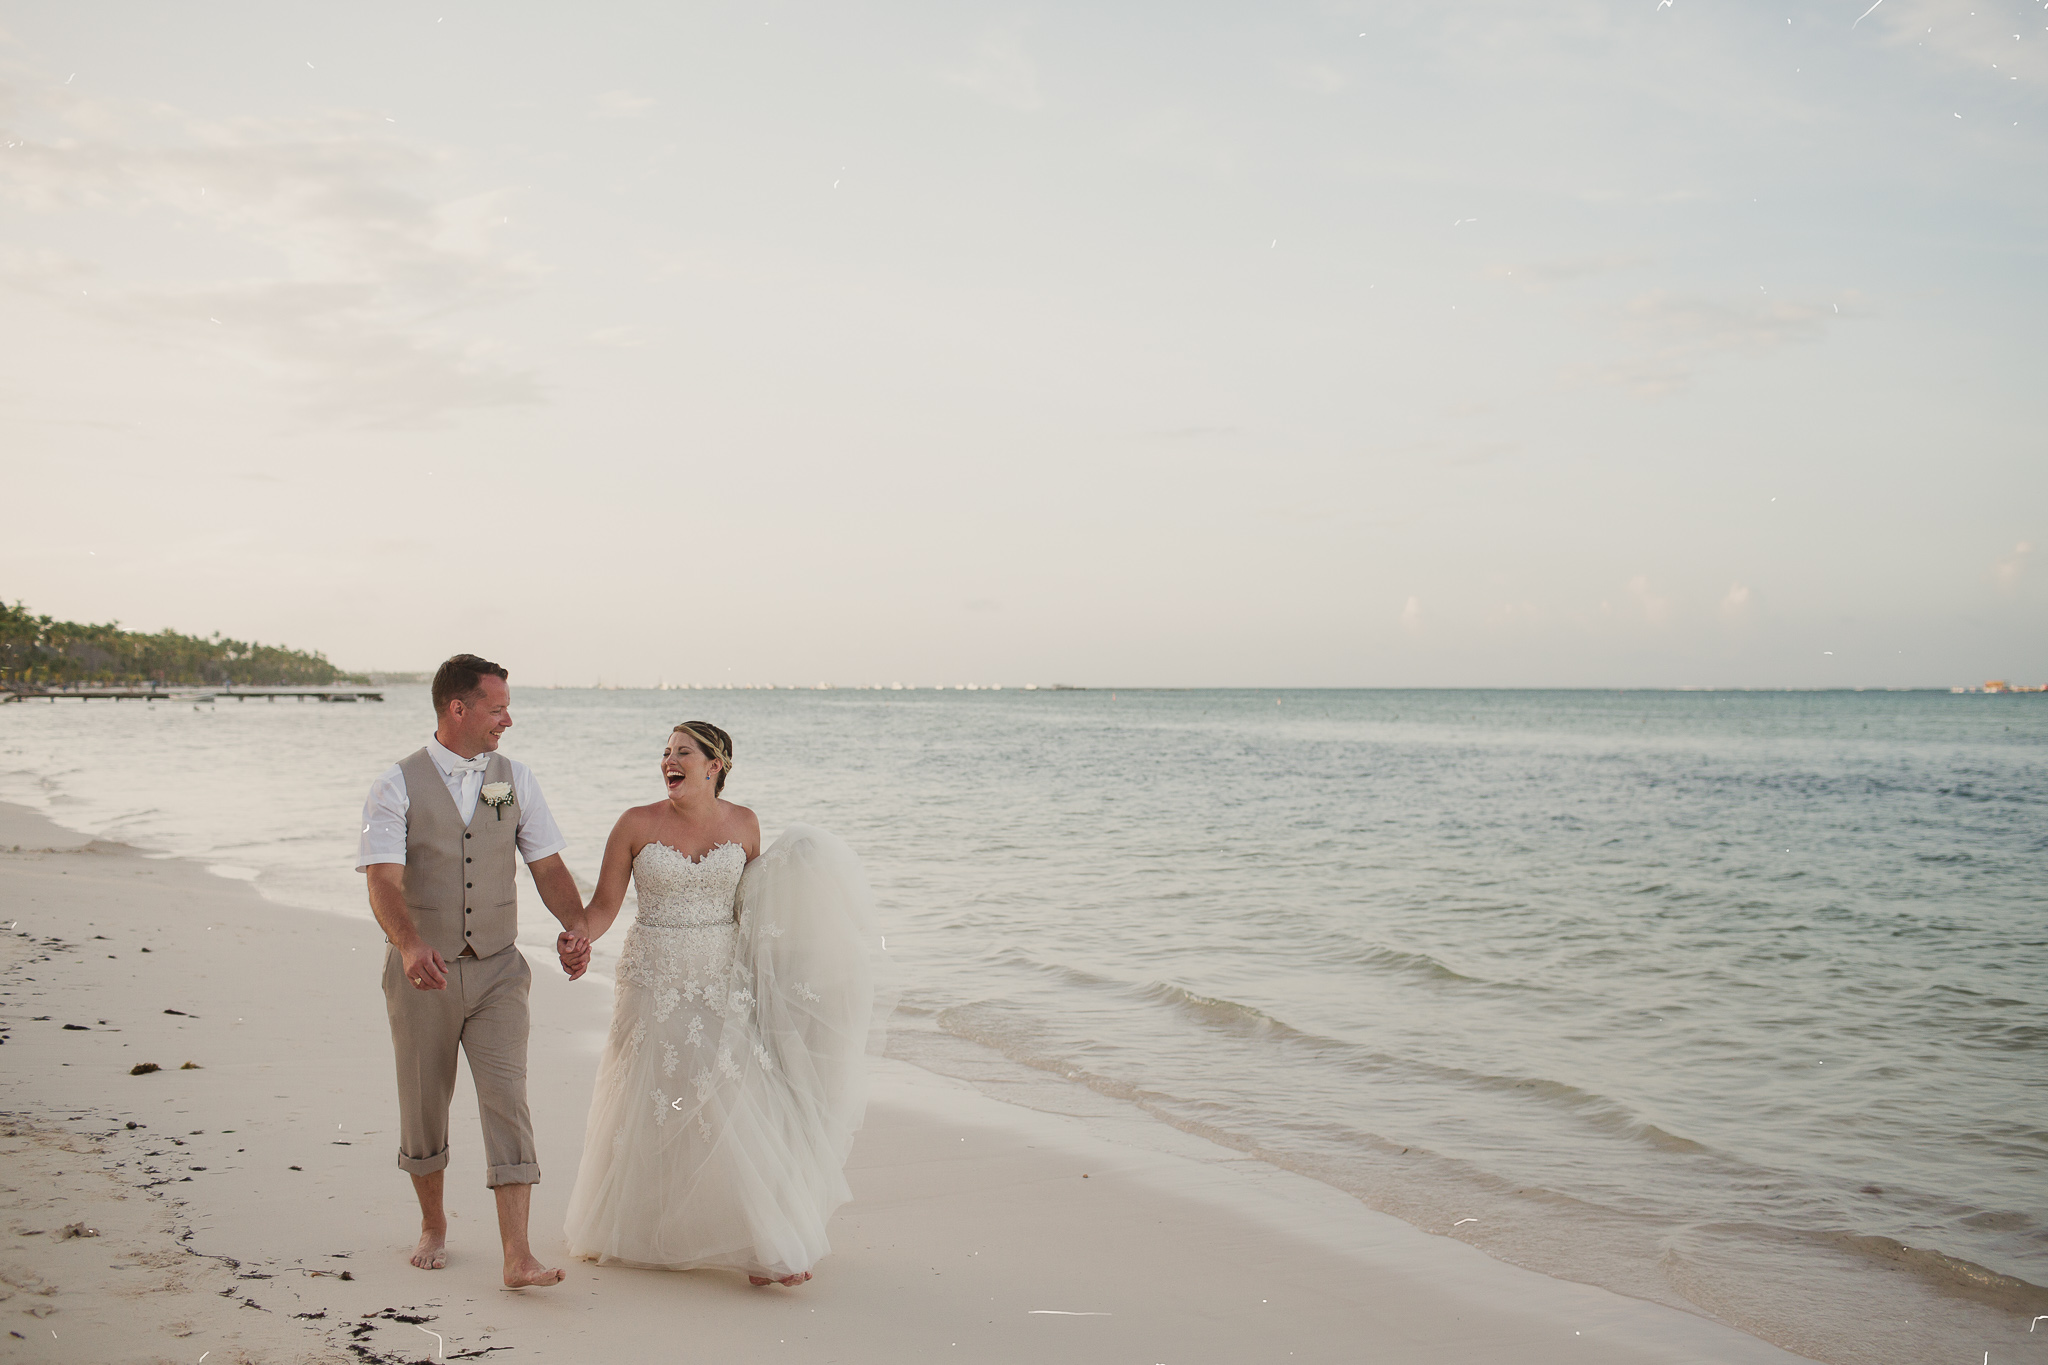 man with woman in a wedding dress walking on the beach